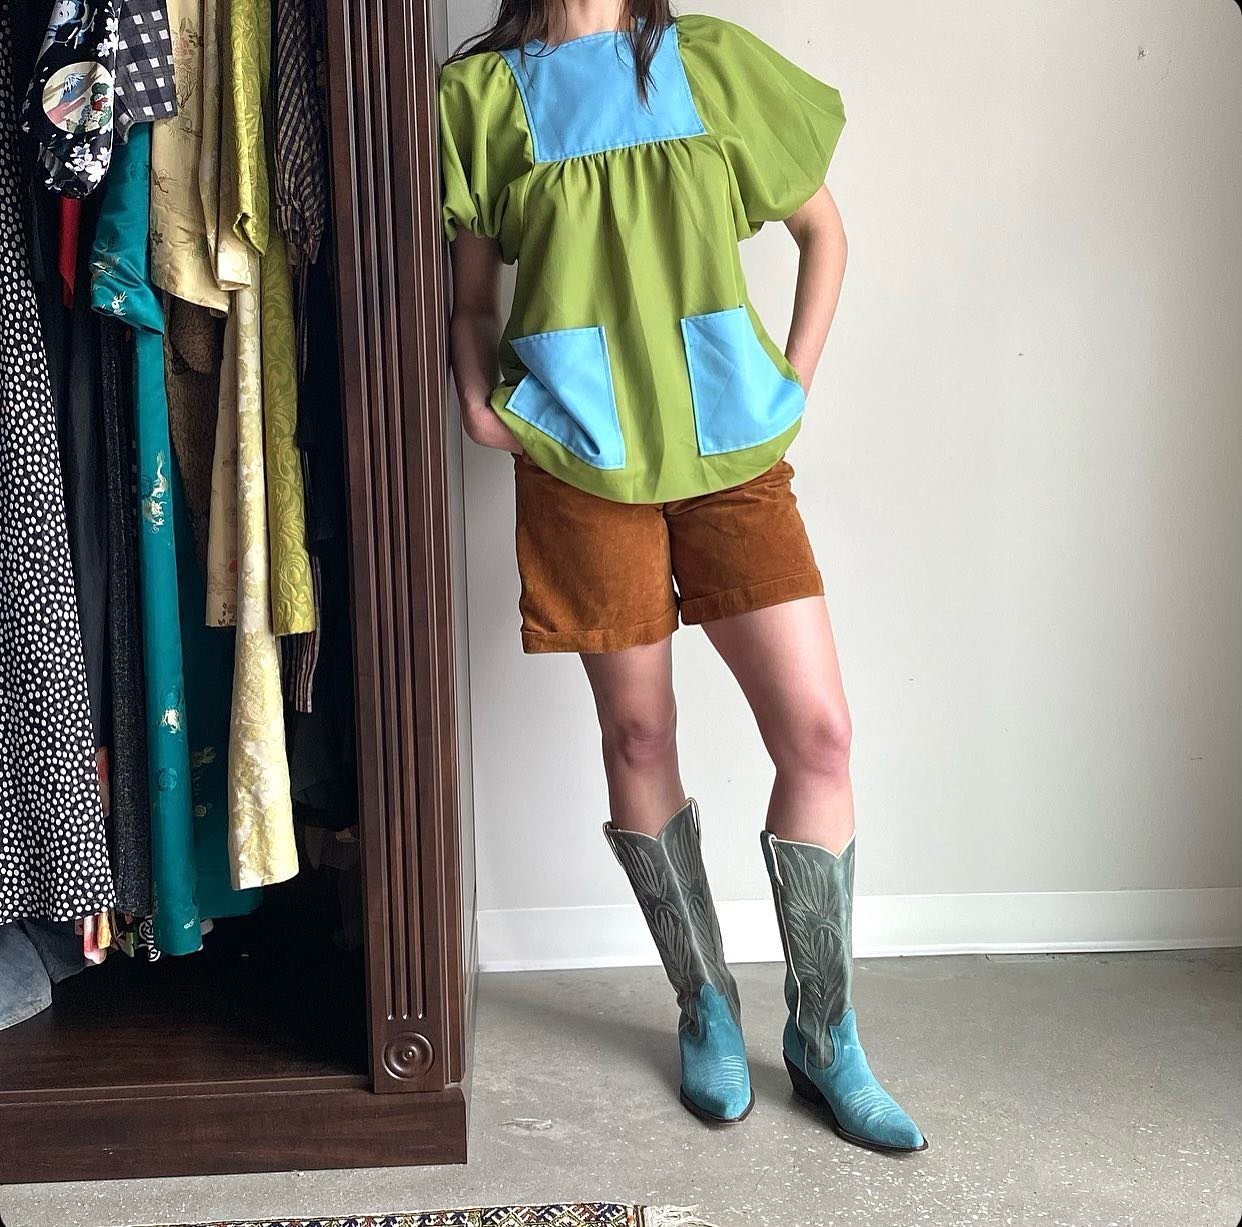 60s smock top in a sick color combo! DM if you wanna snag it before it goes online later today! 💚💙
#1960s #colorblock #mod #60sfashion #milkandice